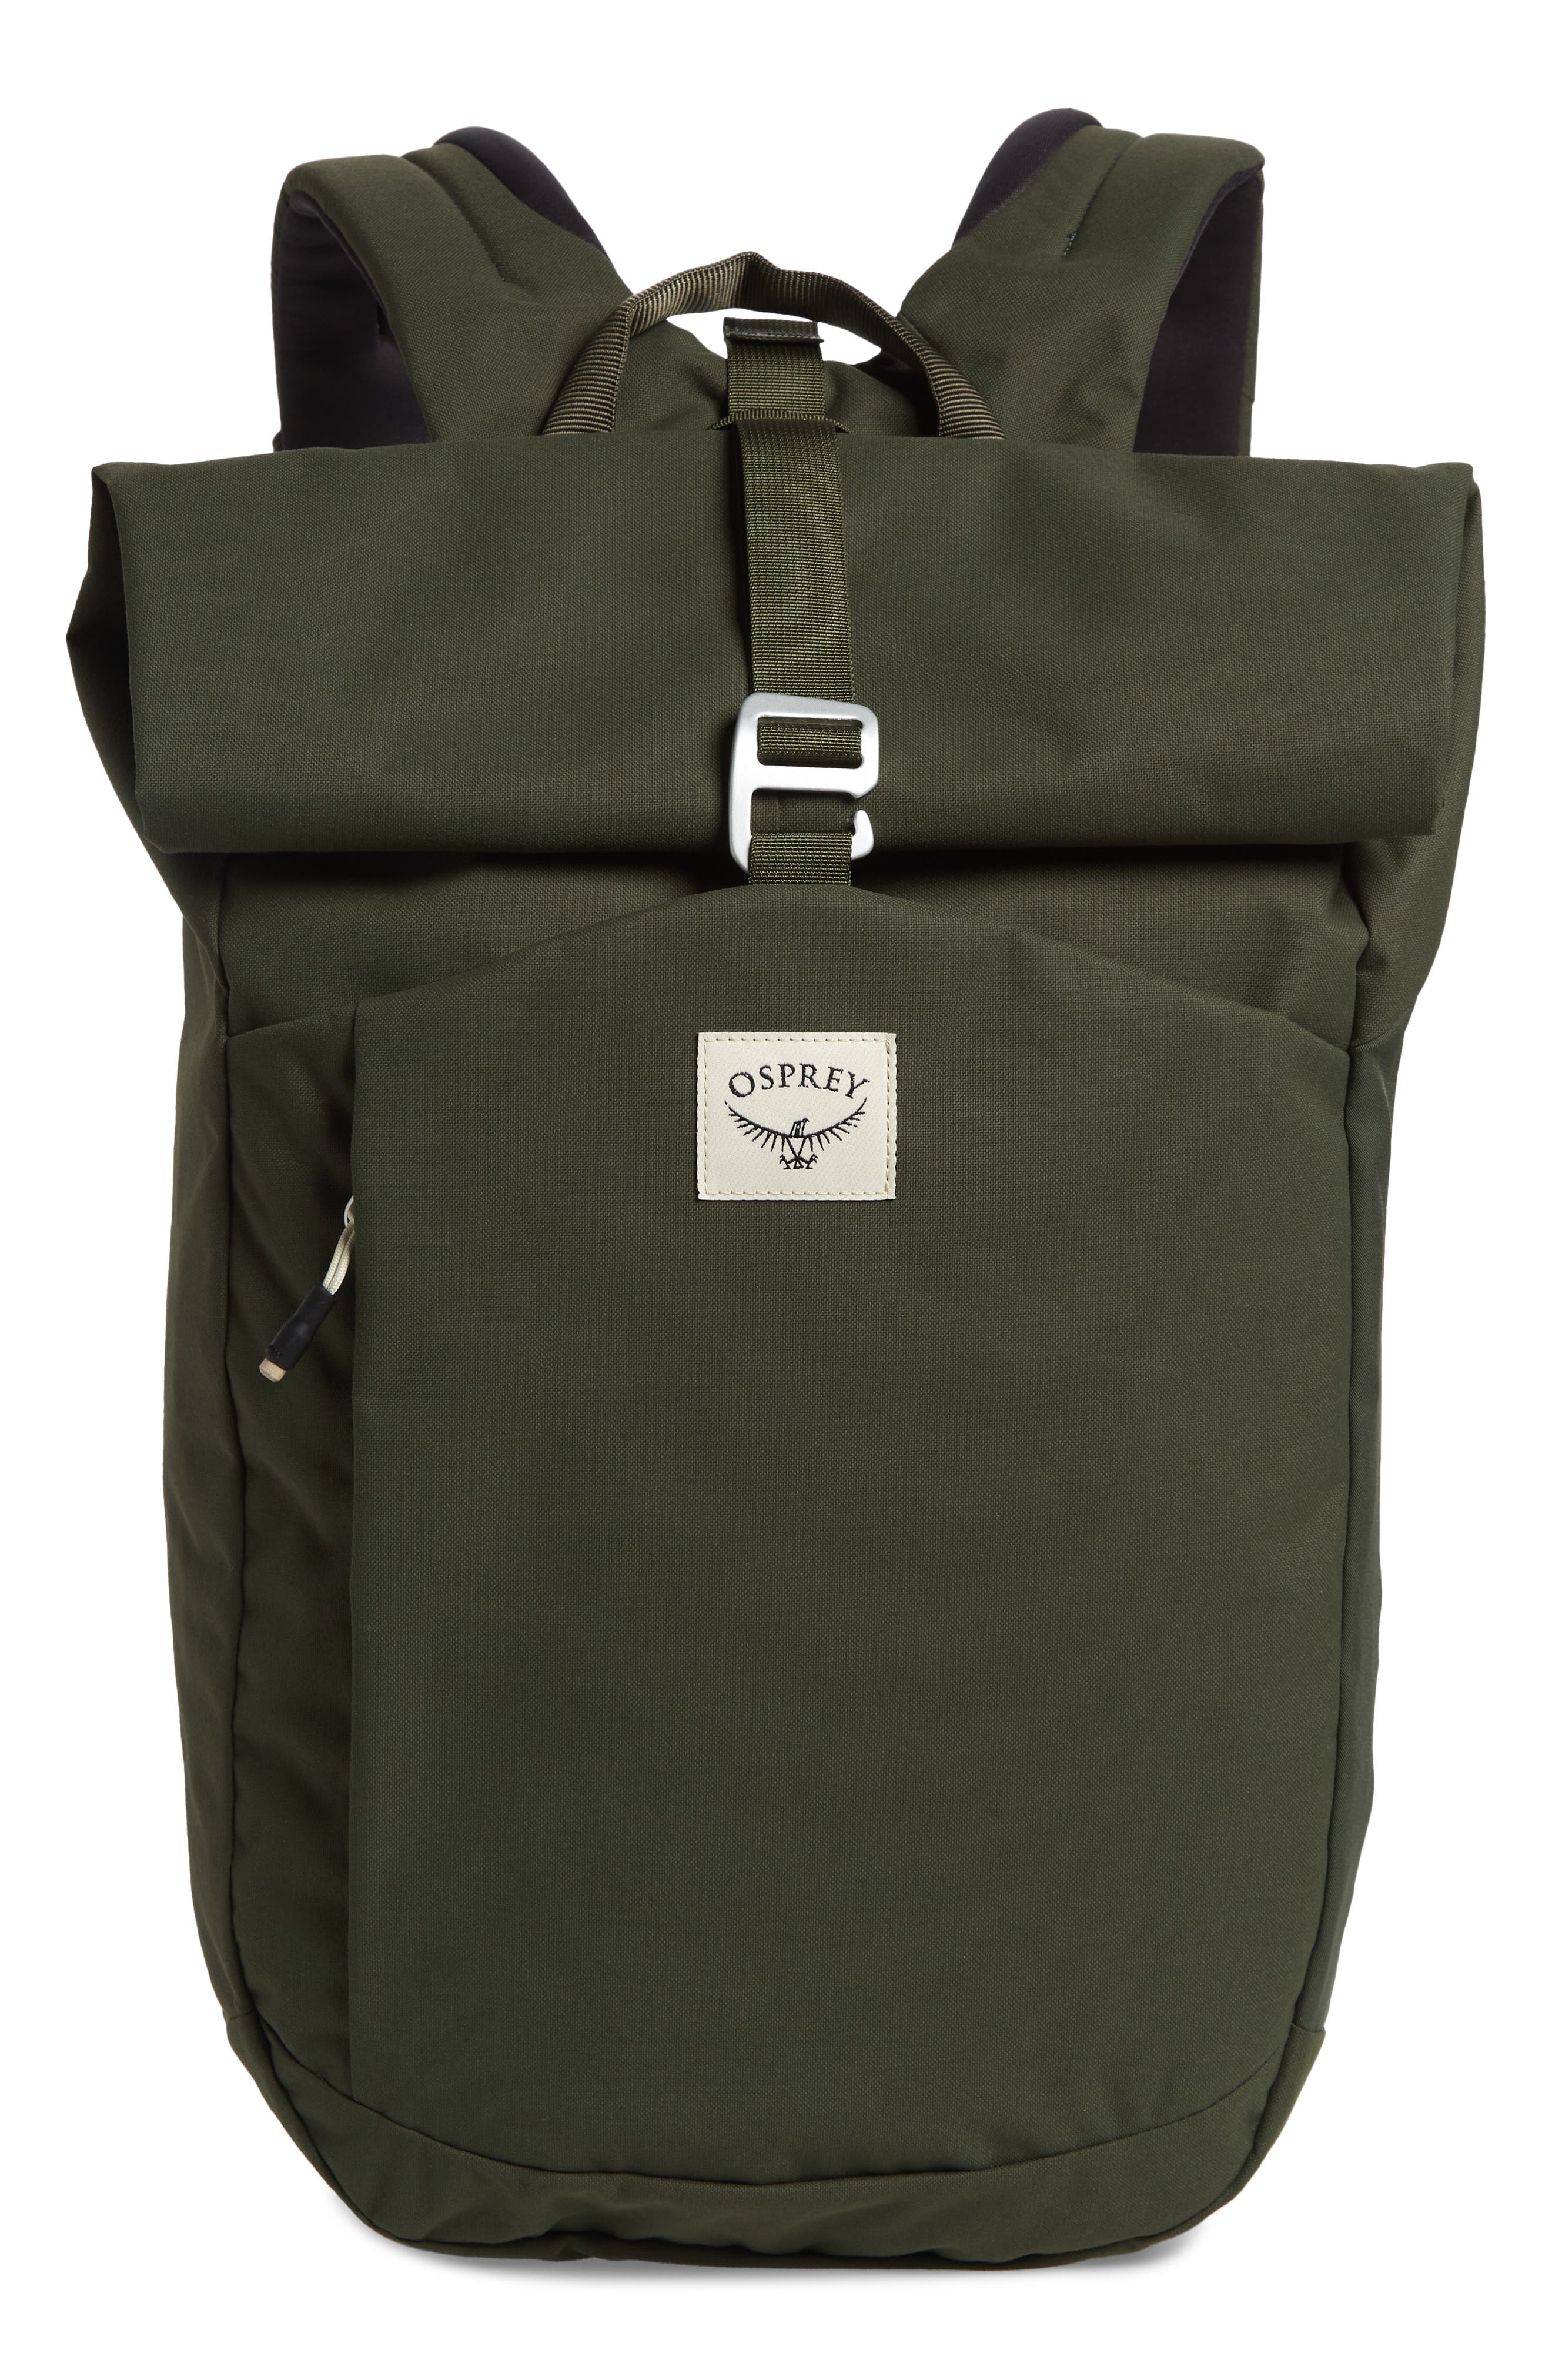 Osprey Arcane Roll Top Backpack in Haybale Green | Smart Closet